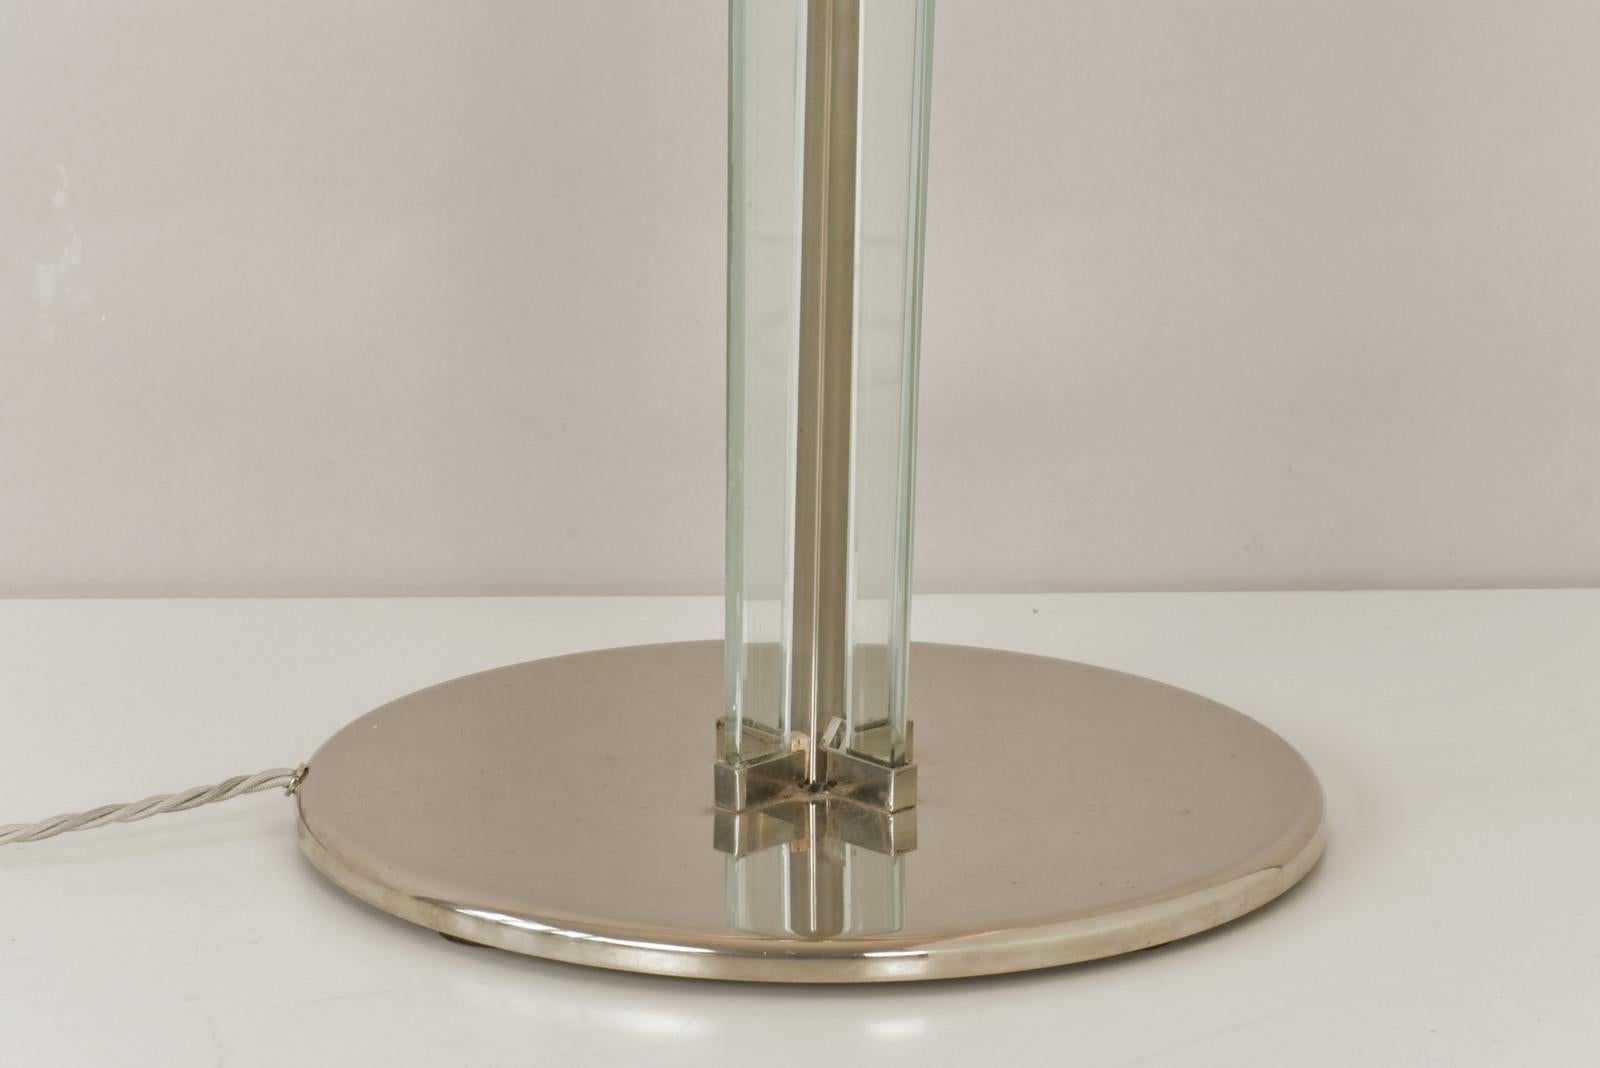 Art Deco Metal and Glass Floor Lamp, France - 1940s  For Sale 1